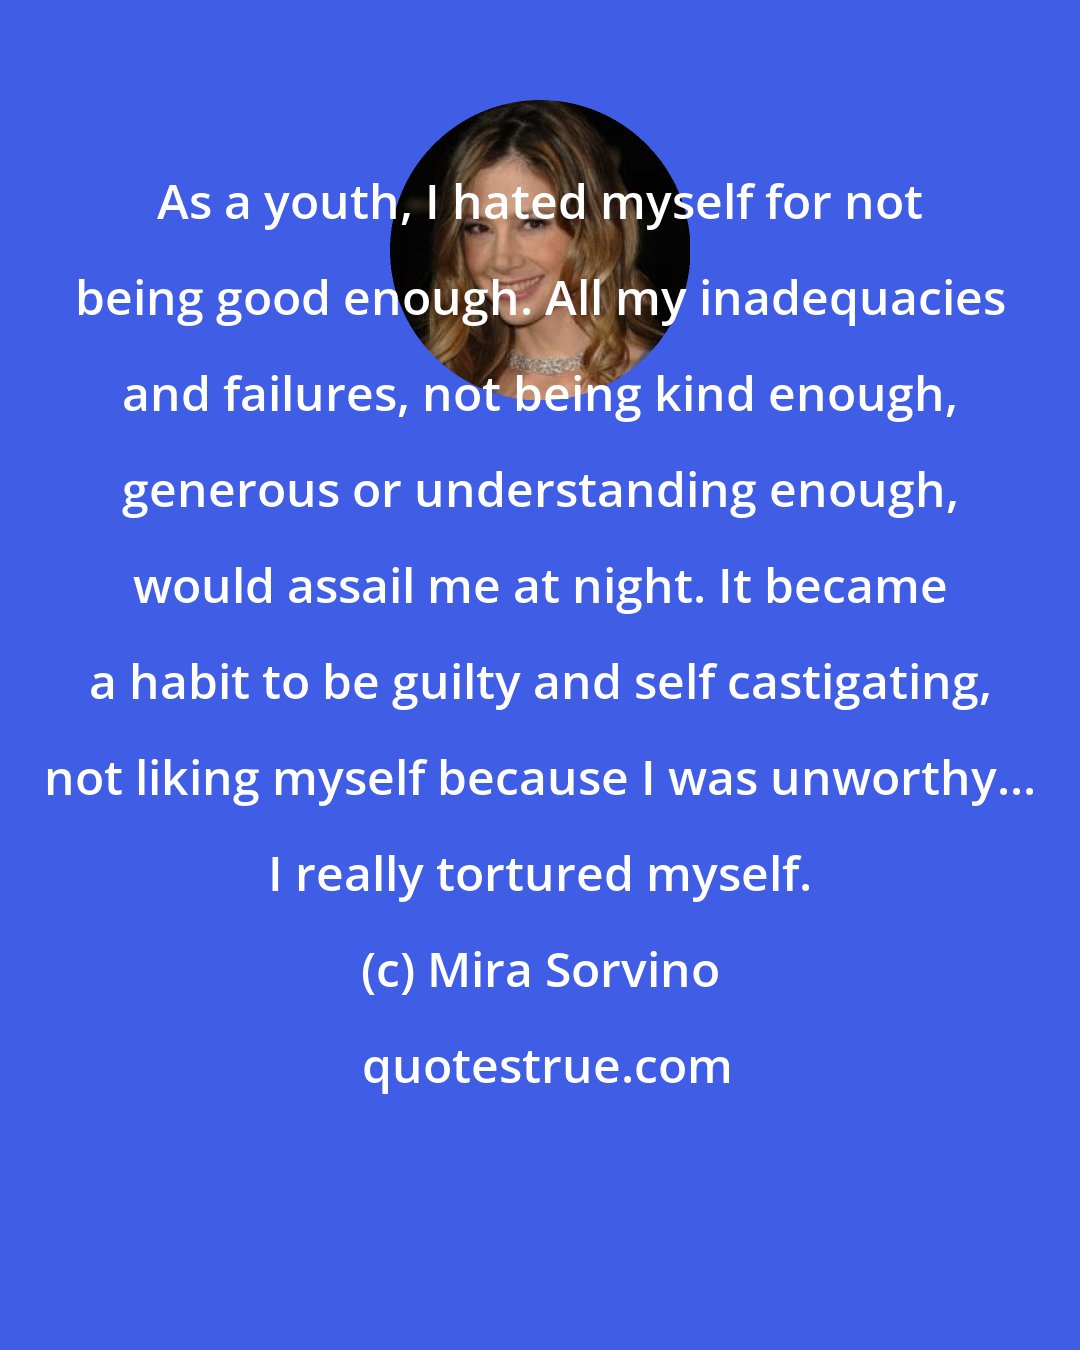 Mira Sorvino: As a youth, I hated myself for not being good enough. All my inadequacies and failures, not being kind enough, generous or understanding enough, would assail me at night. It became a habit to be guilty and self castigating, not liking myself because I was unworthy... I really tortured myself.